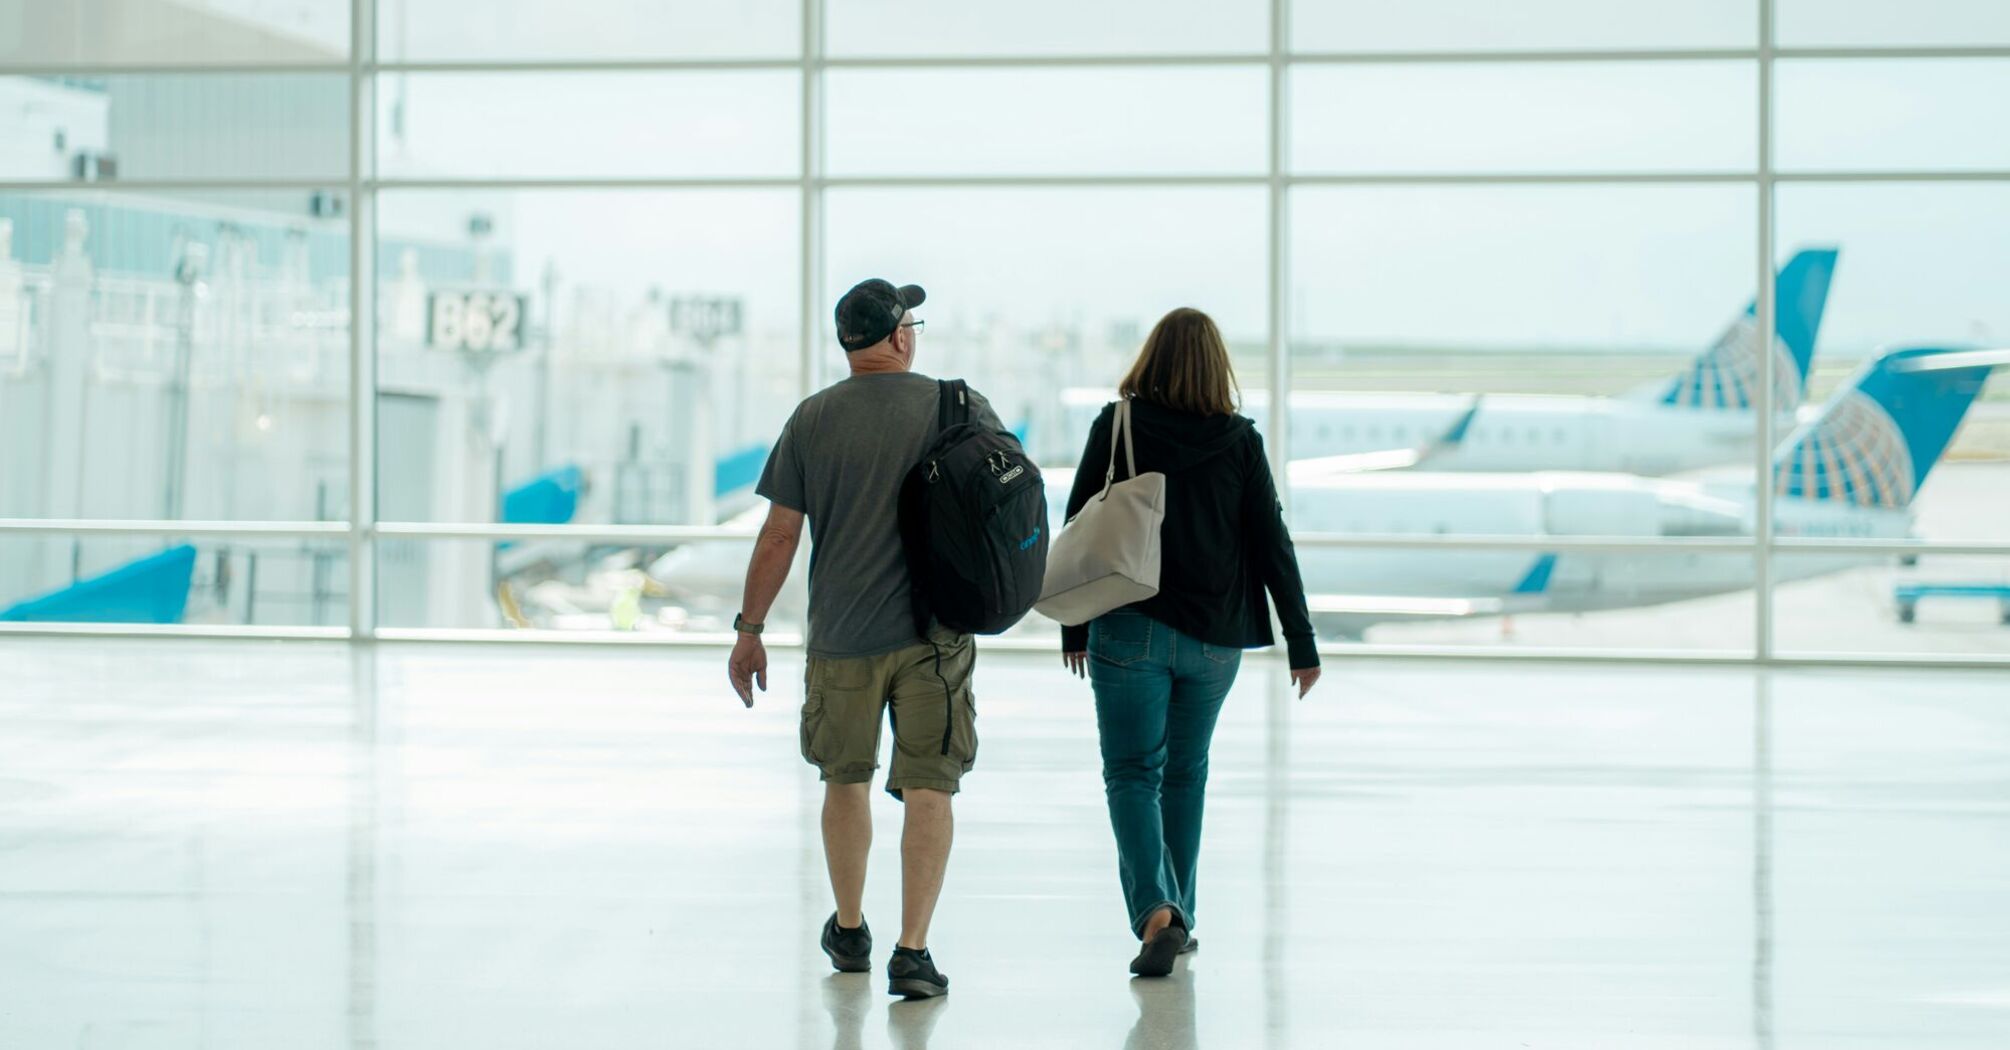 A man and a woman walking hand in hand in an airport terminal, with a clear view of parked airplanes through the large glass windows in the background